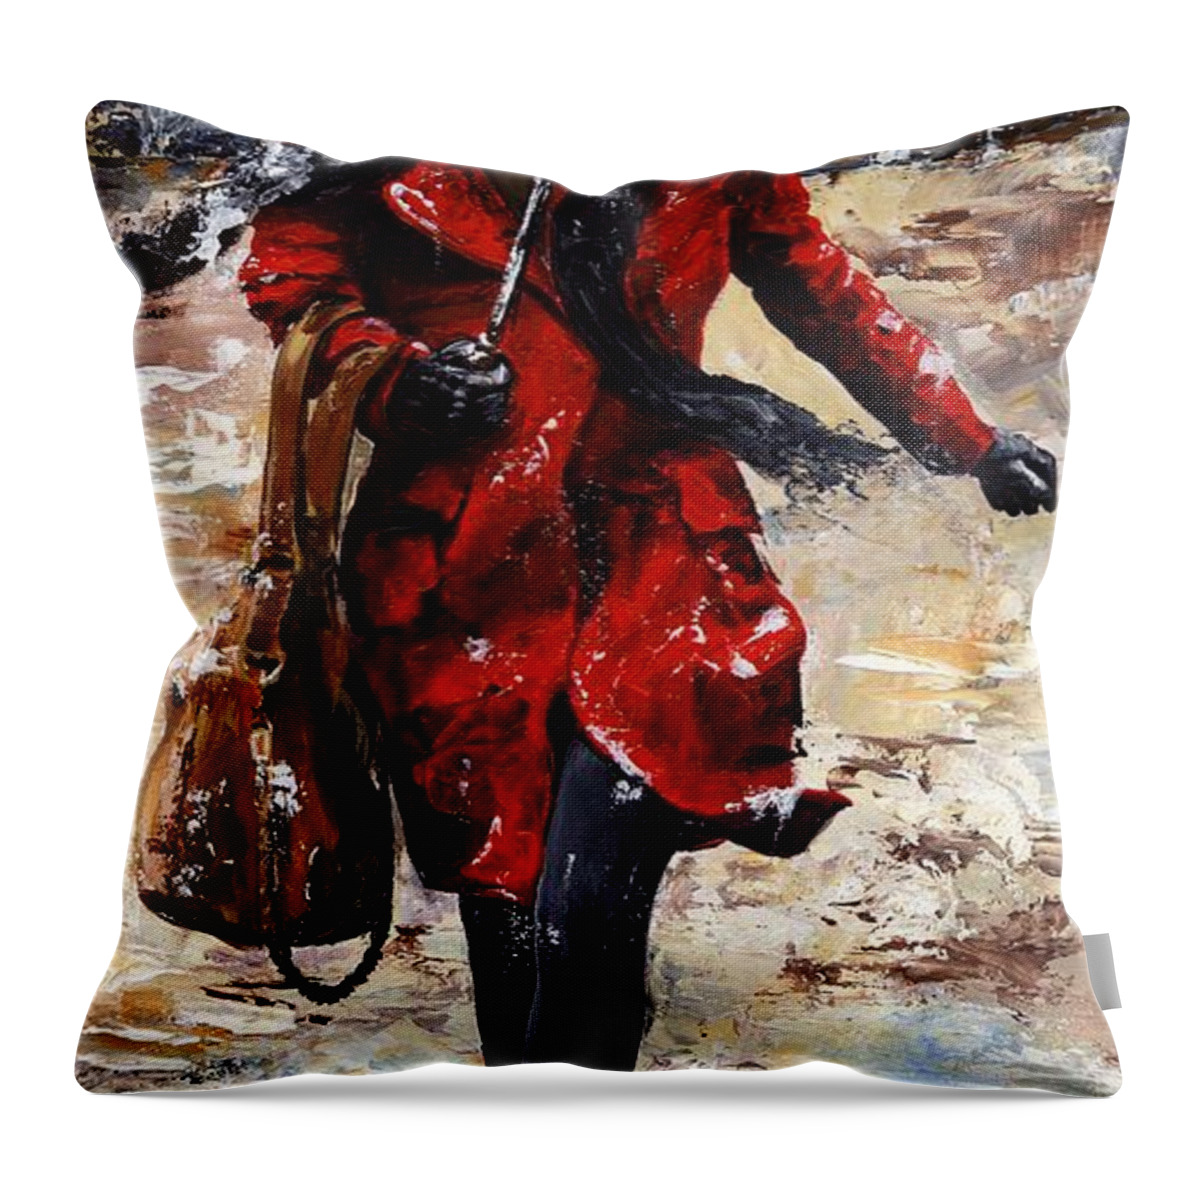 Rain Throw Pillow featuring the painting Rainy day - Woman of New York 10 by Emerico Imre Toth